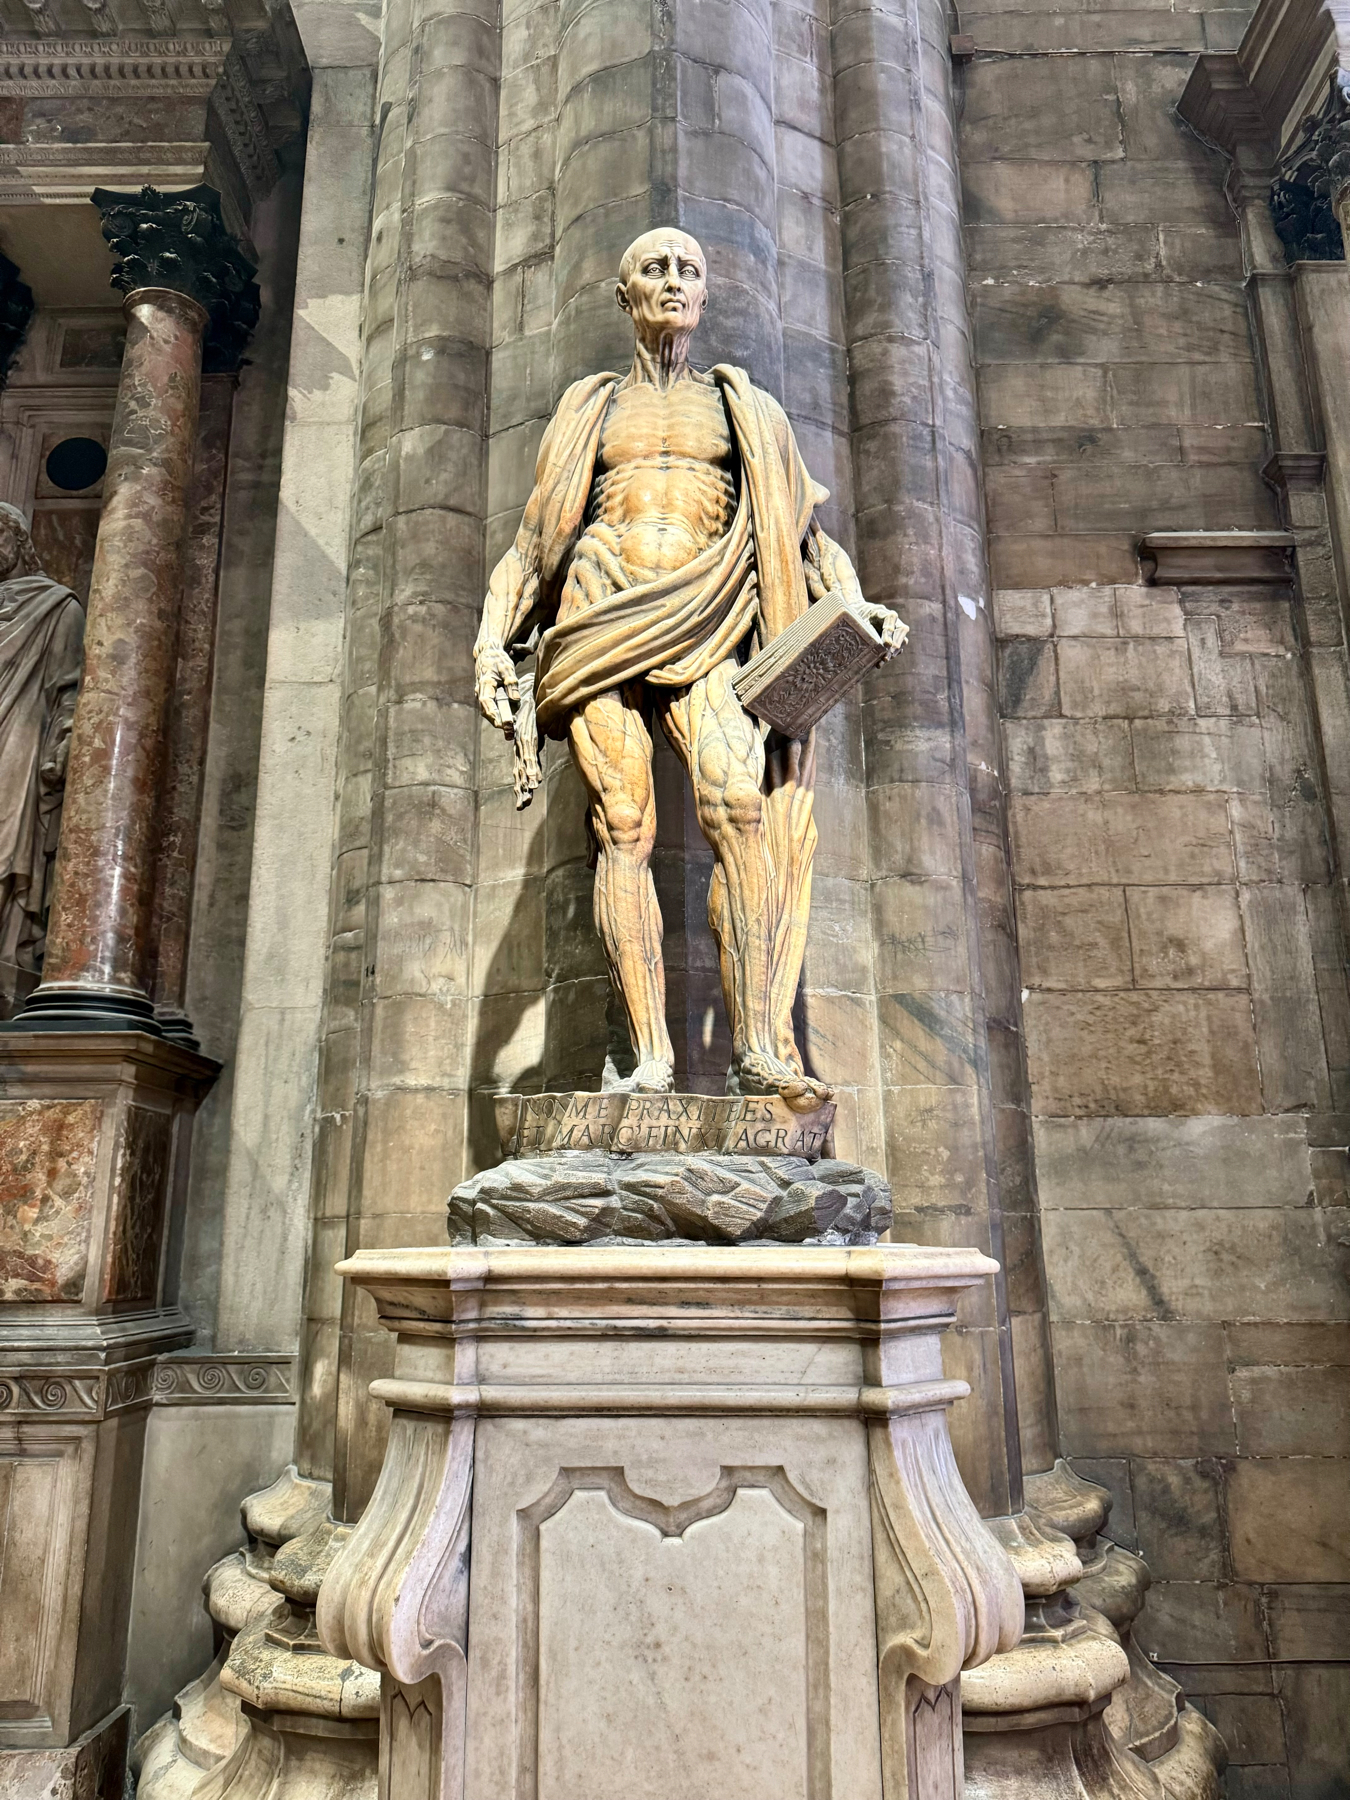 A marble statue of Saint Bartholomew stands in front of a stone wall inside a historical building. The statue depicts an anatomically detailed, muscular figure holding a book and a knife, with a draped cloth over his shoulder.